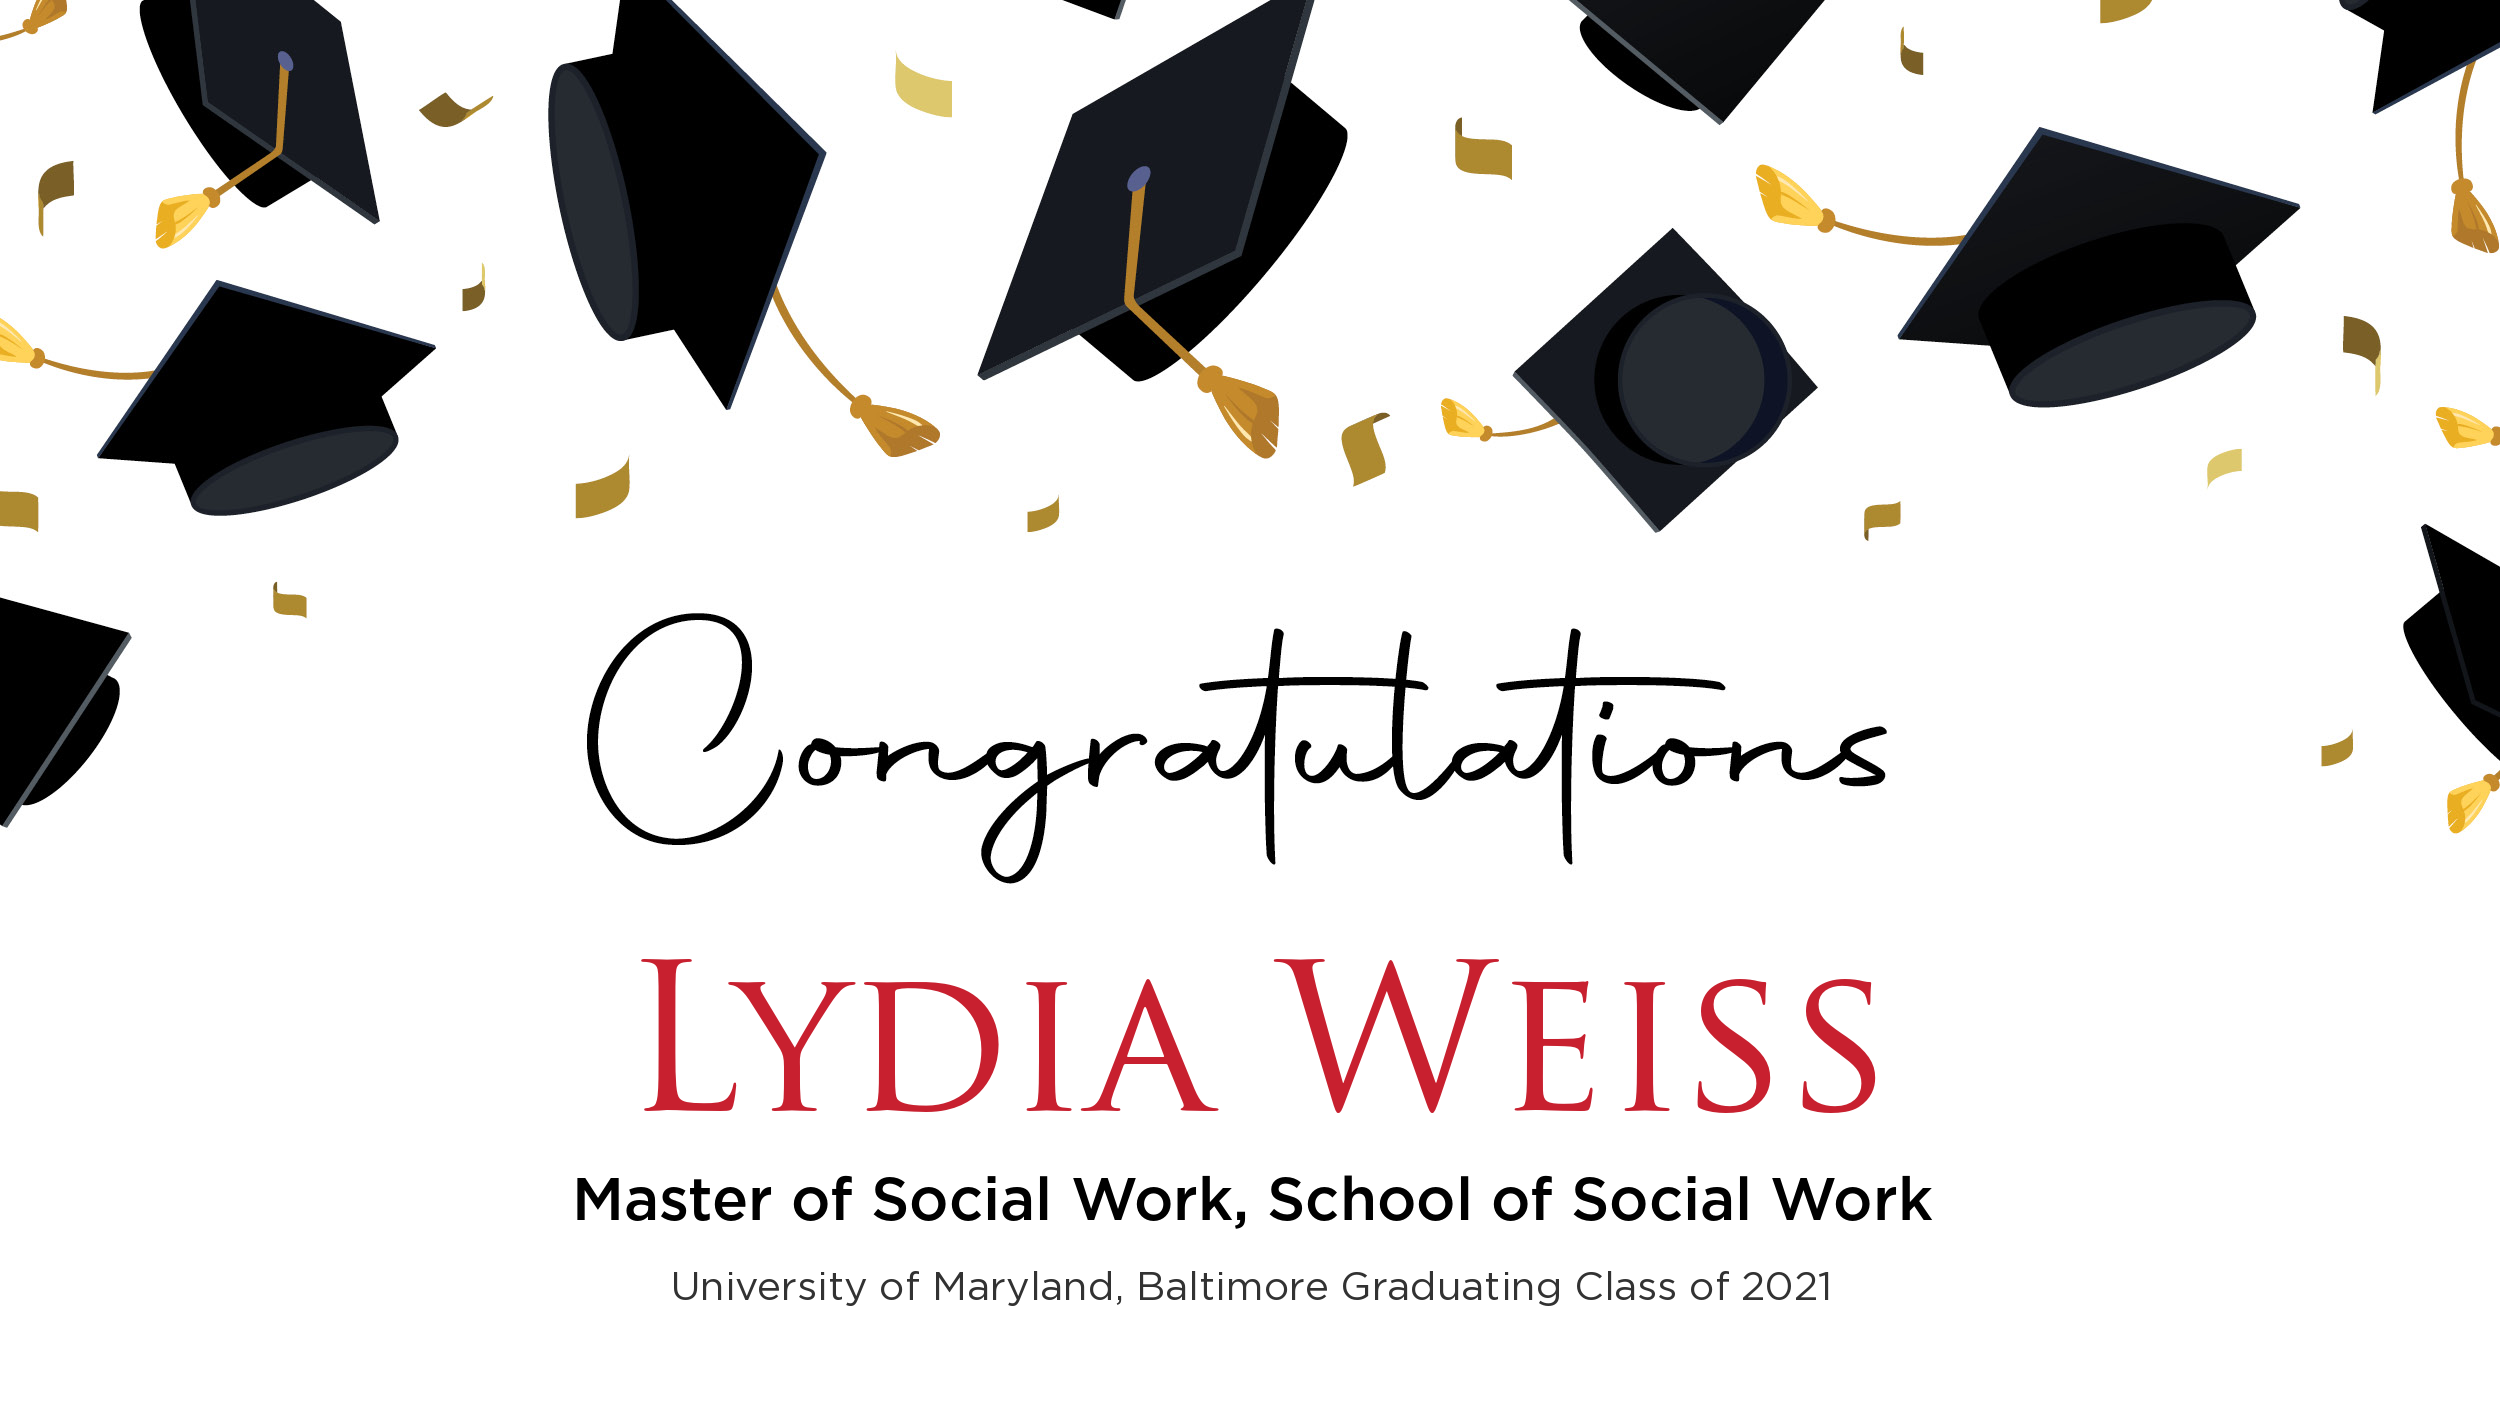 Congratulations Lydia Weiss, Master of Social Work